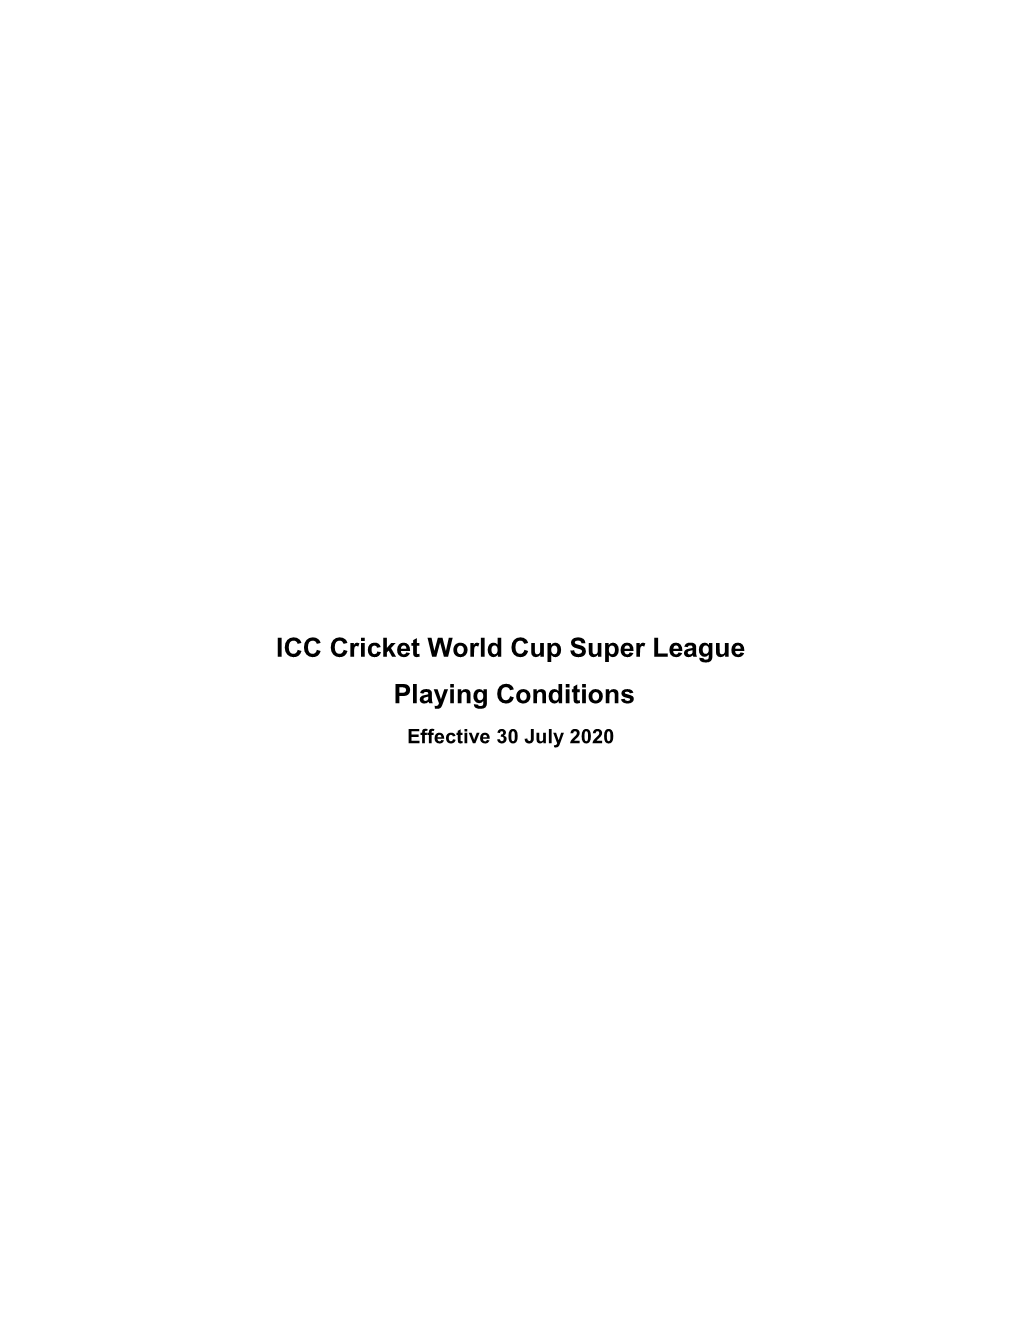 ICC Cricket World Cup Super League Playing Conditions